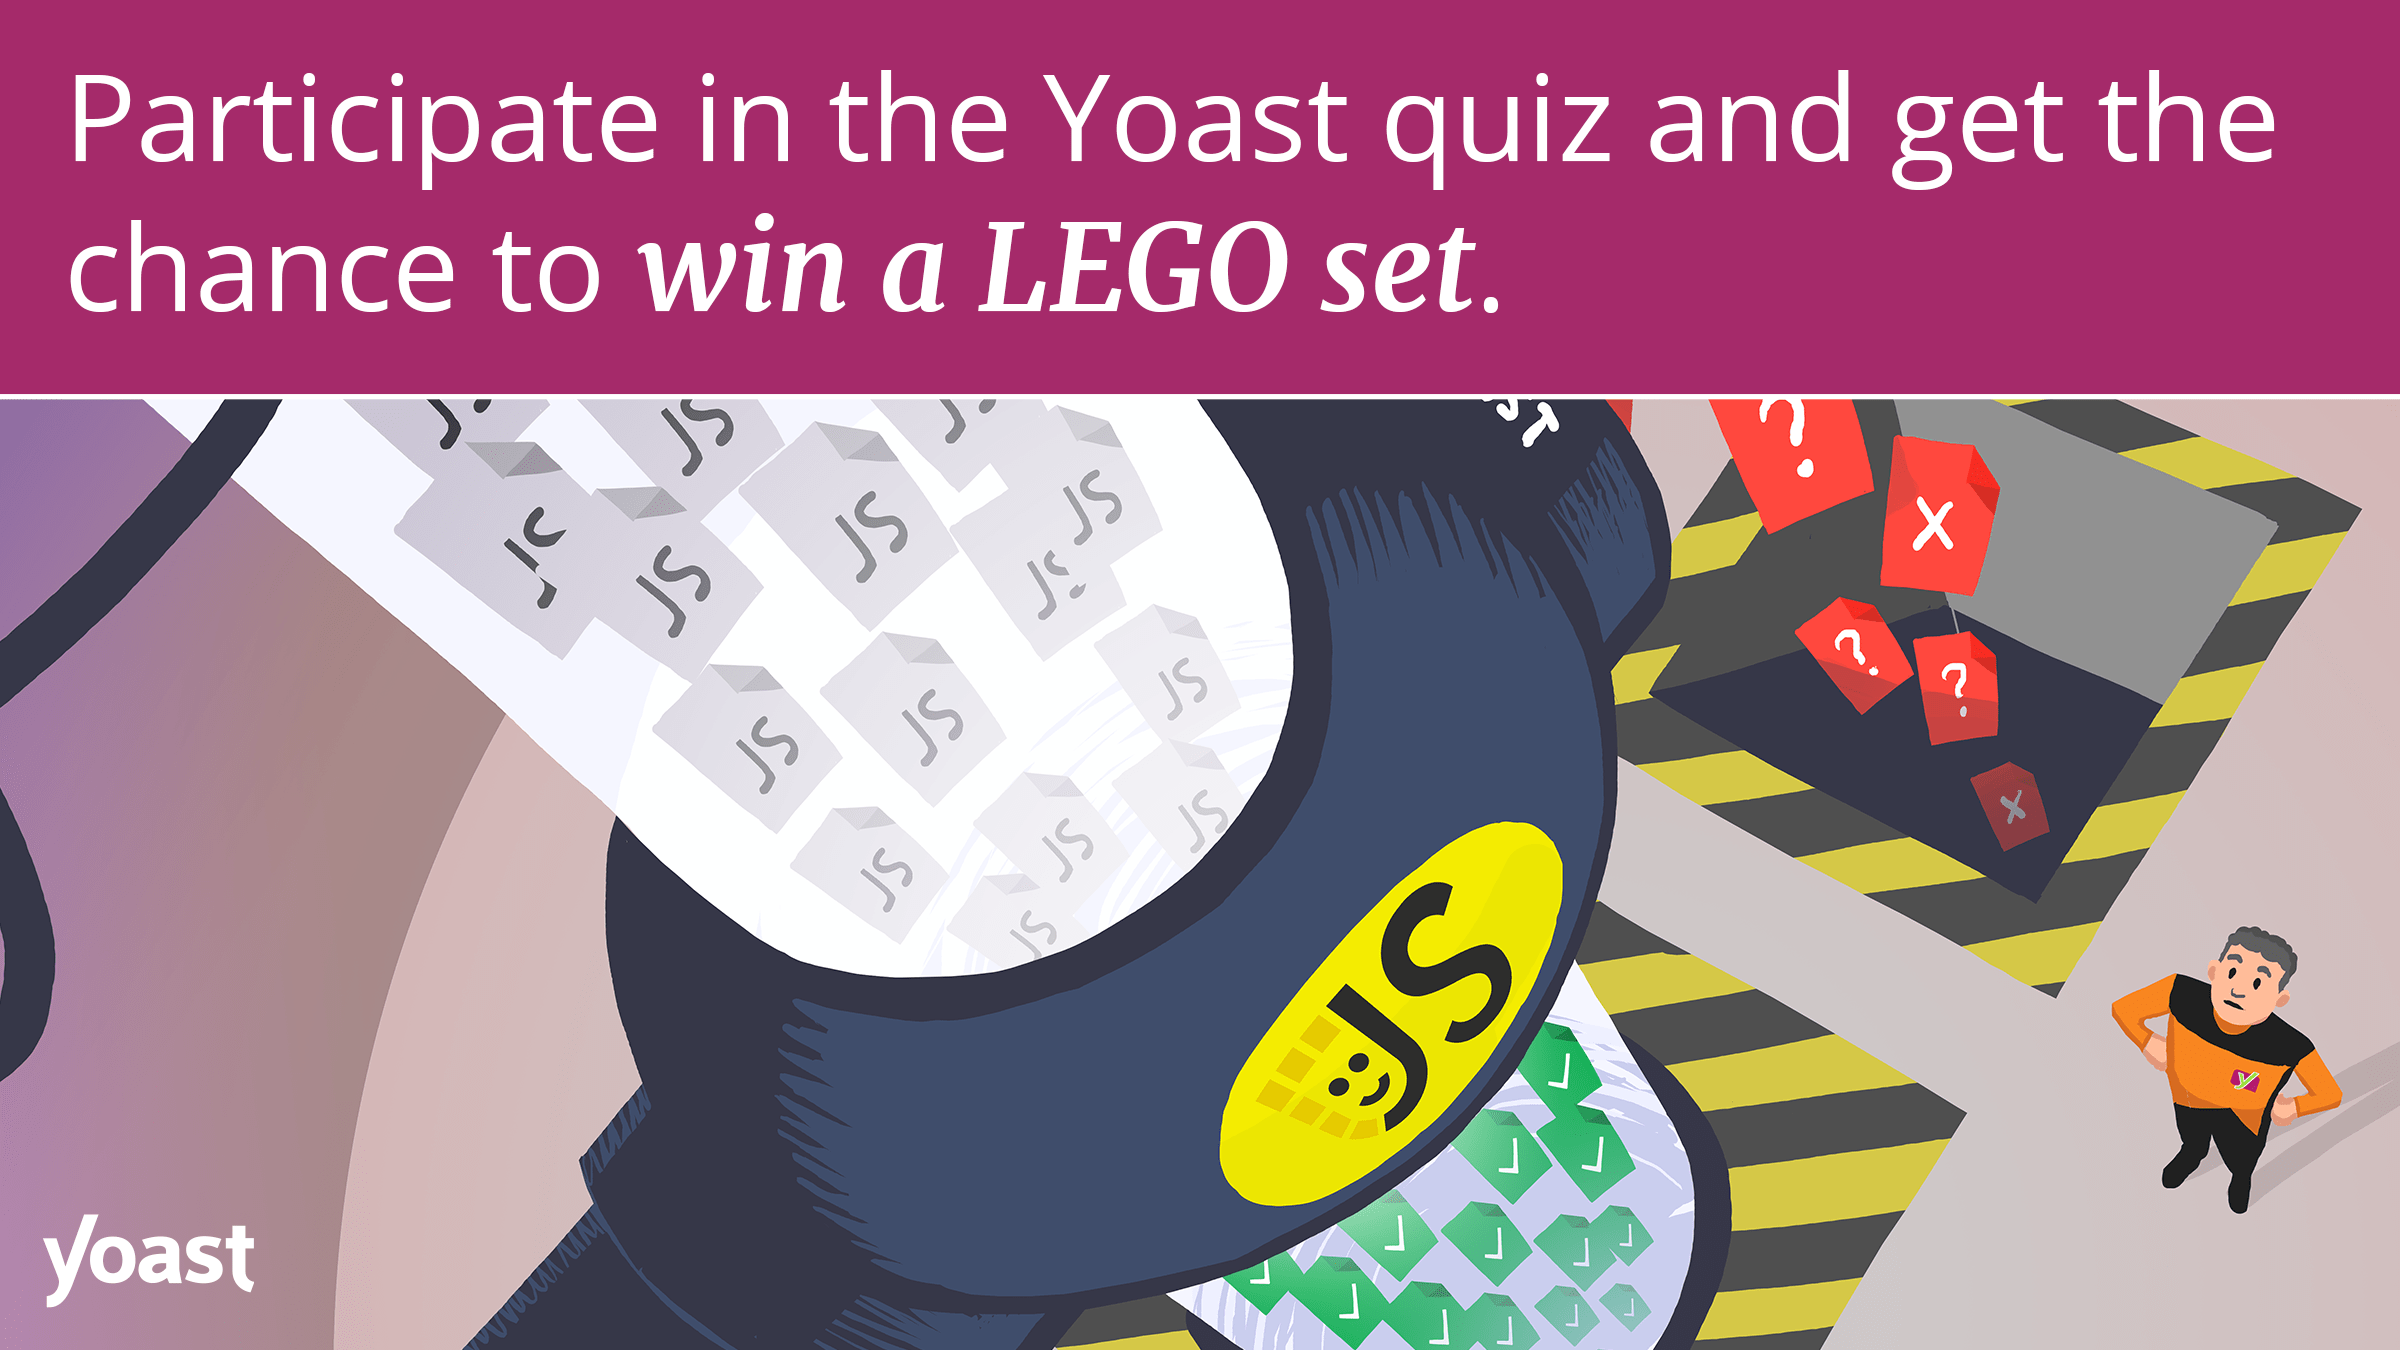 <p>Join the quiz and get a chance at winning a LEGO set! </p>
